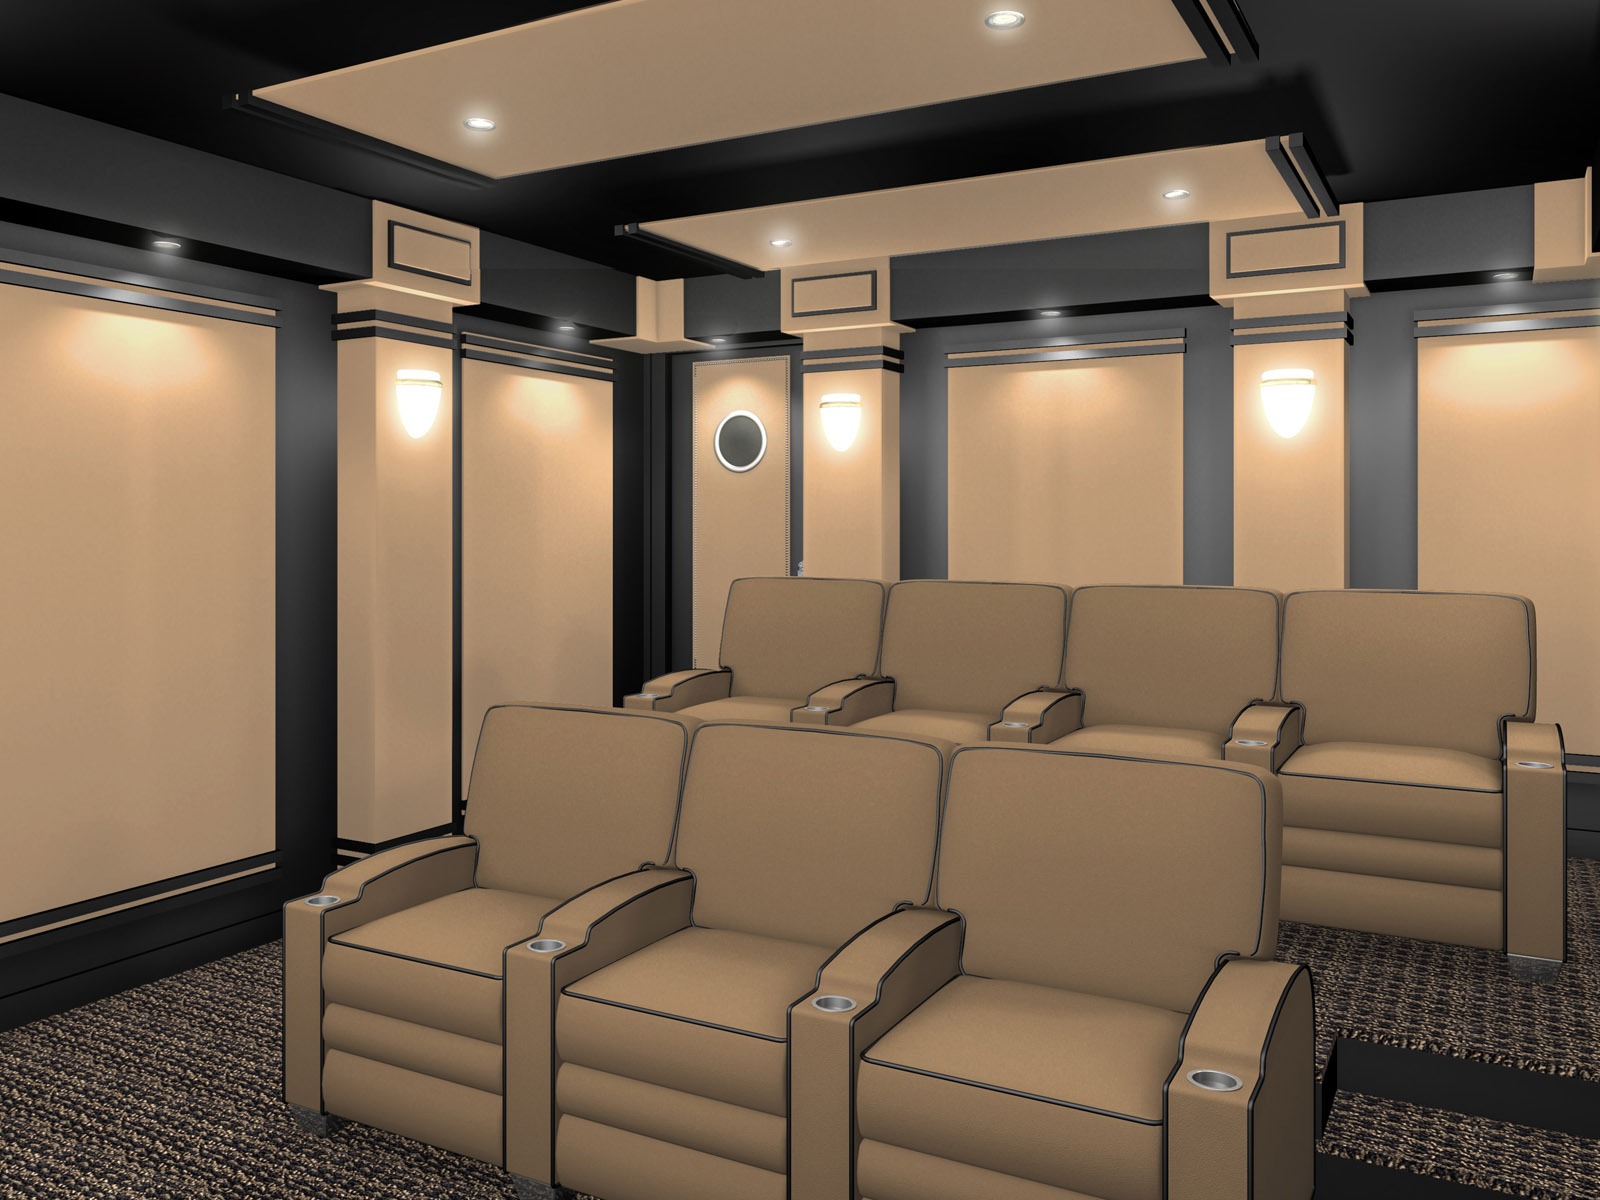 Home Theater wallpaper (1) #7 - 1600x1200